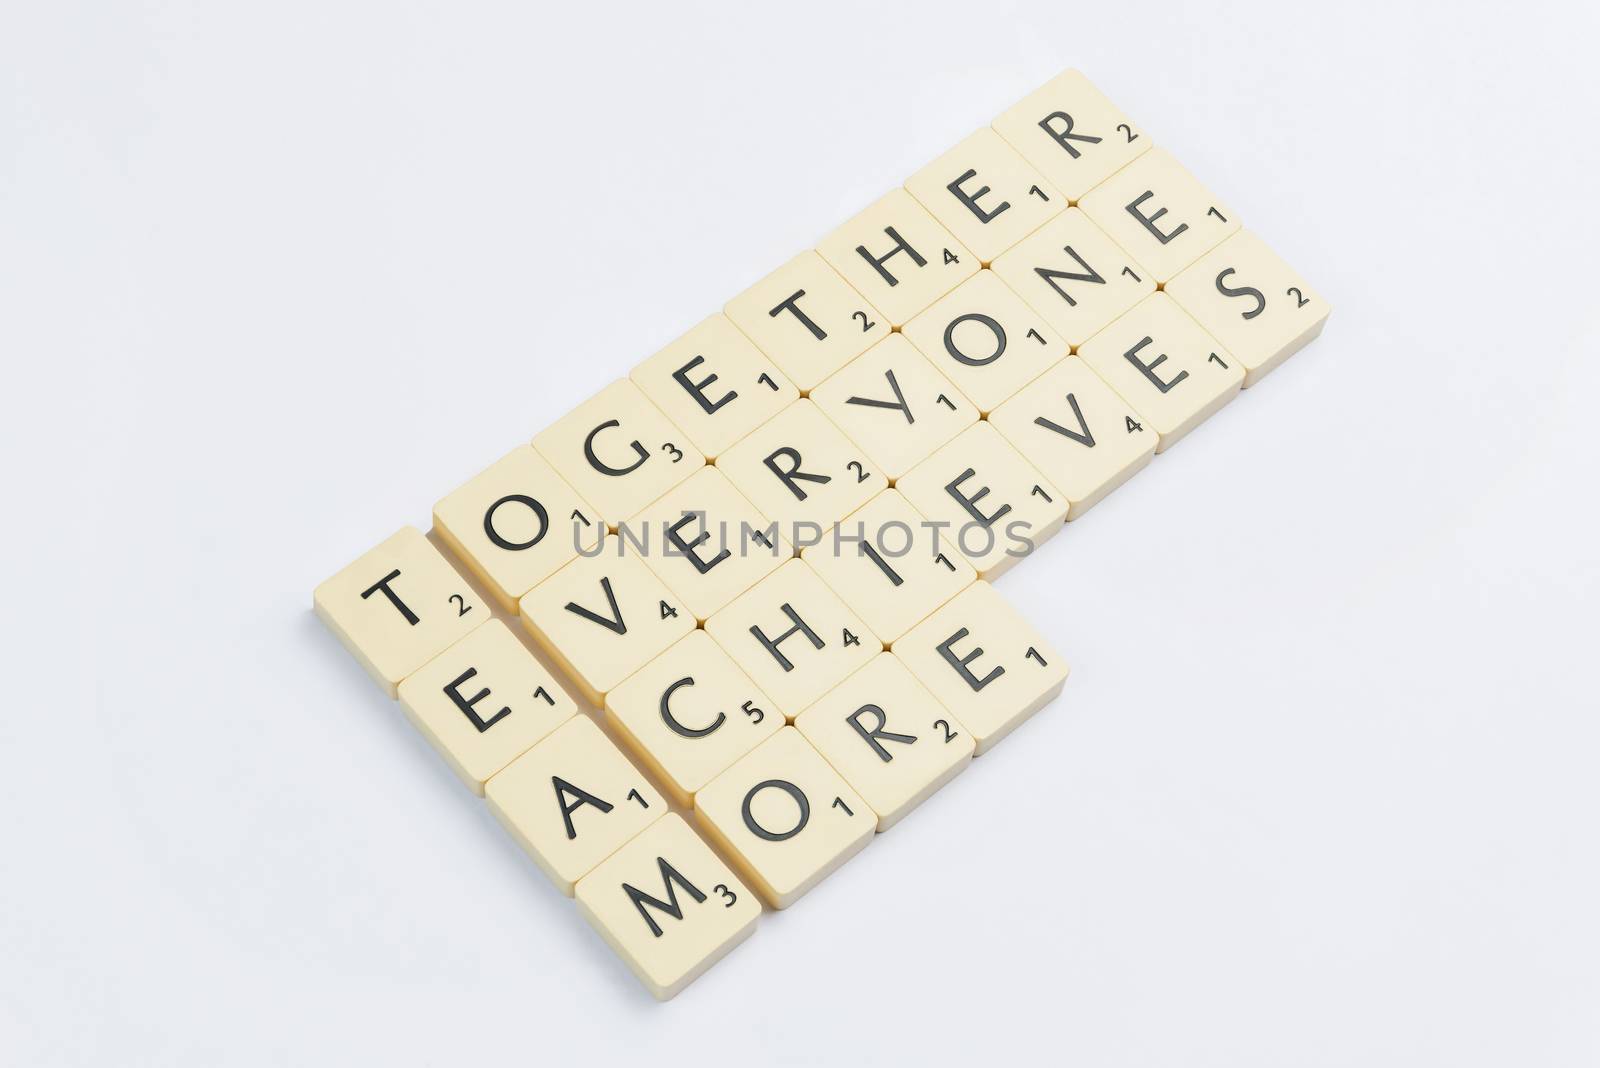 Four scrabble words related to the word team in English
